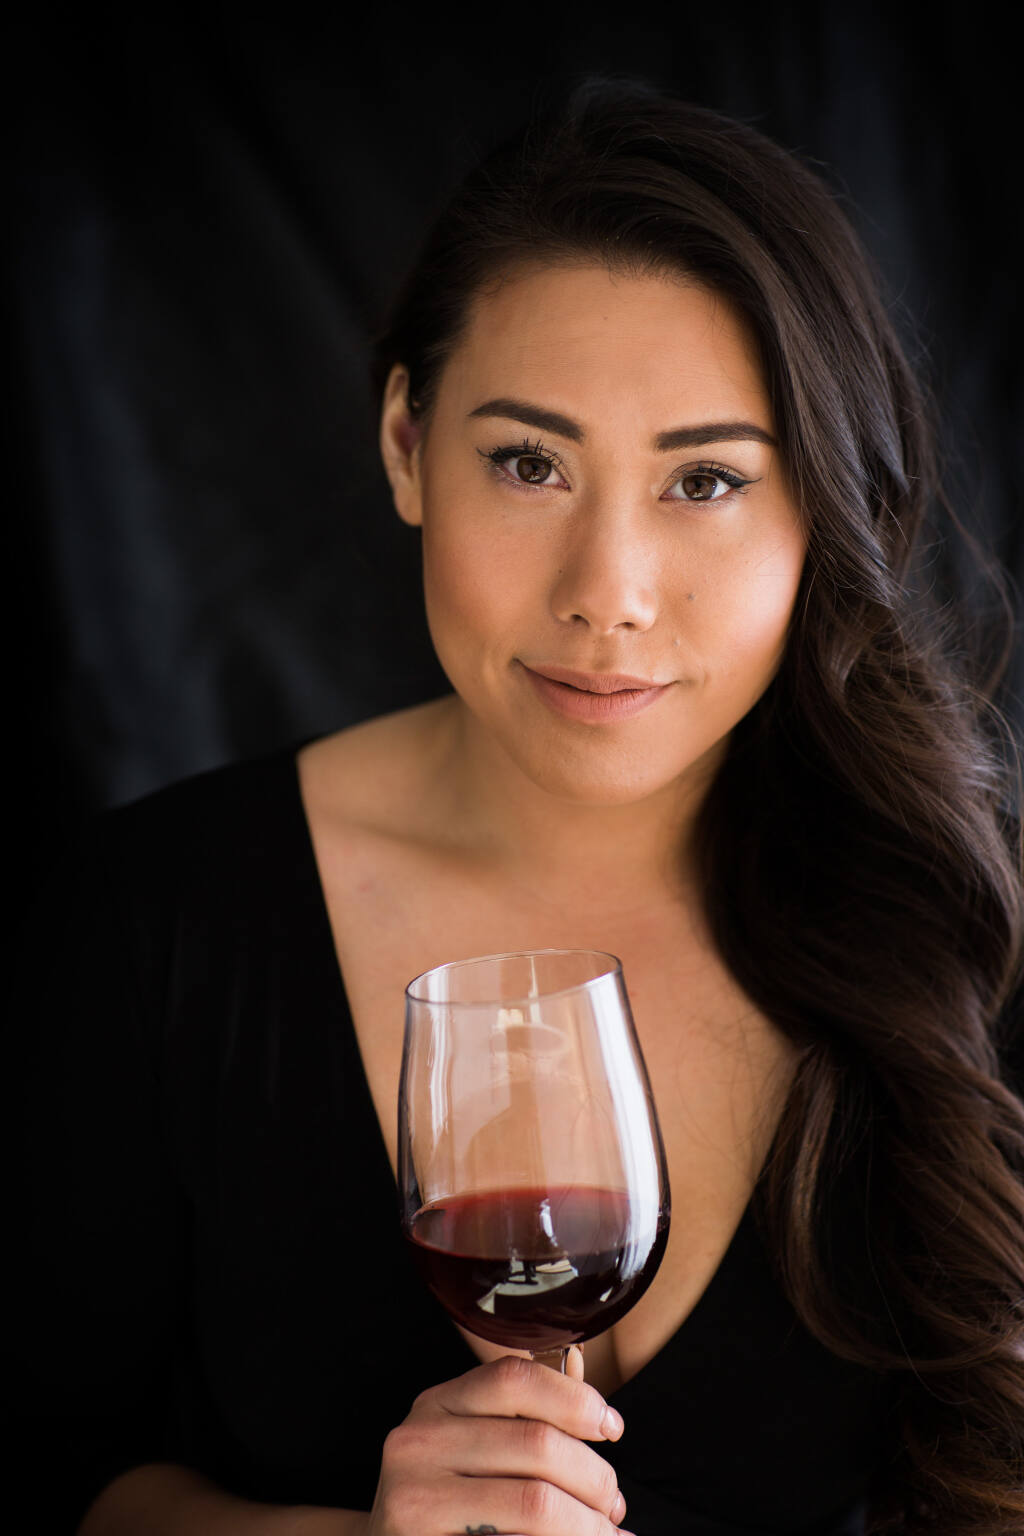 Cristie Norman, 26, is the president of the United Sommeliers Foundation and runs an online wine learning business. (courtesy photo)